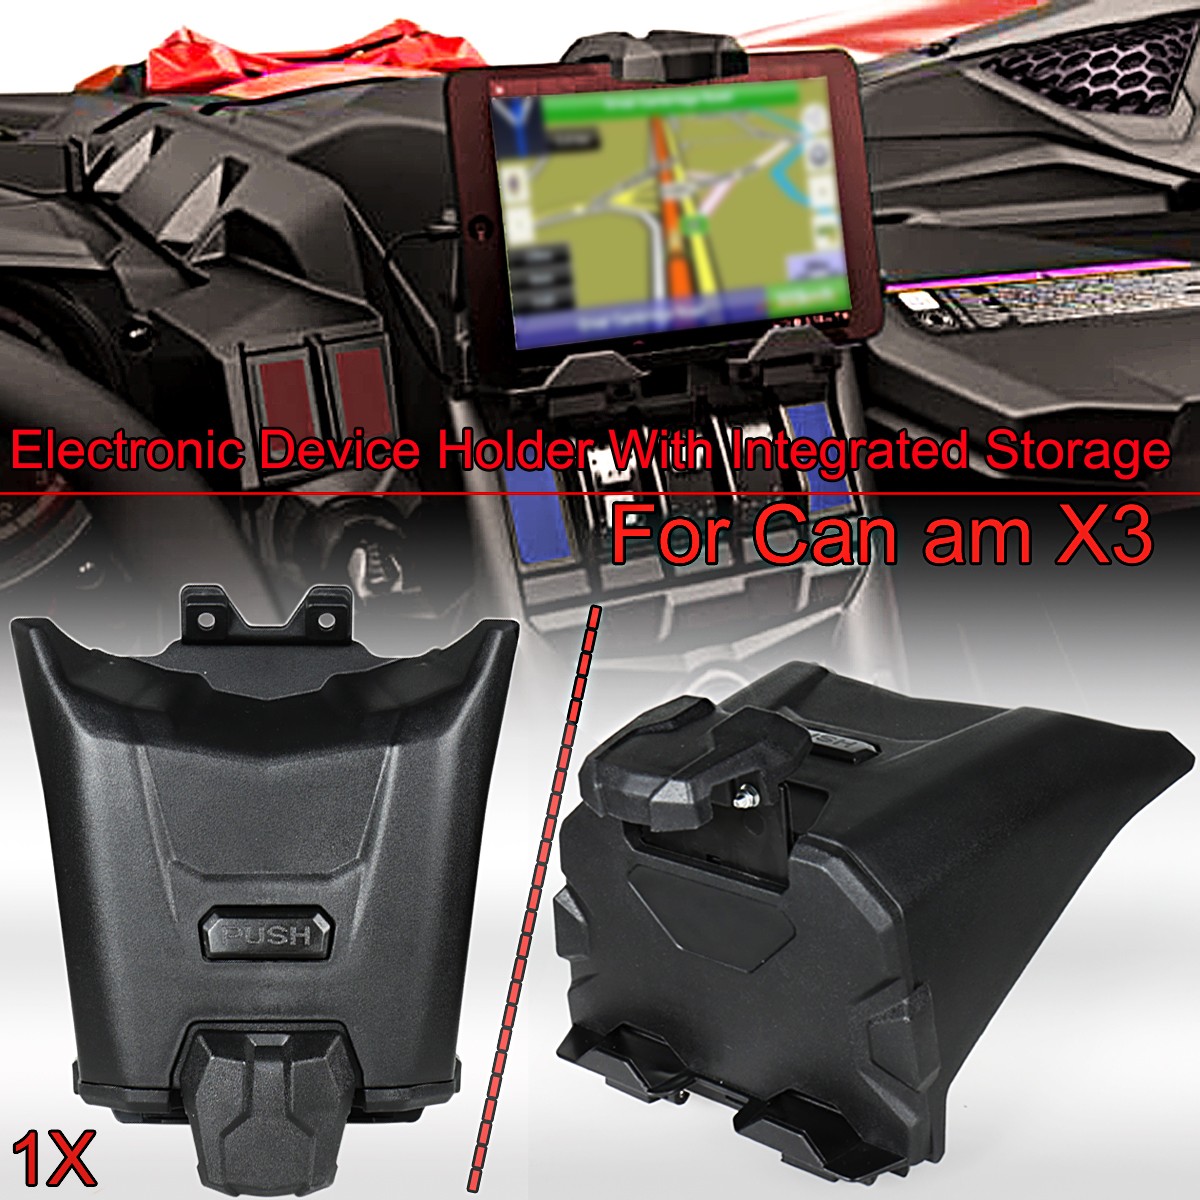 Rudyness Electronic Device Holder with Integrated Storage for 2017-2020 Can Am Maverick X3 Models